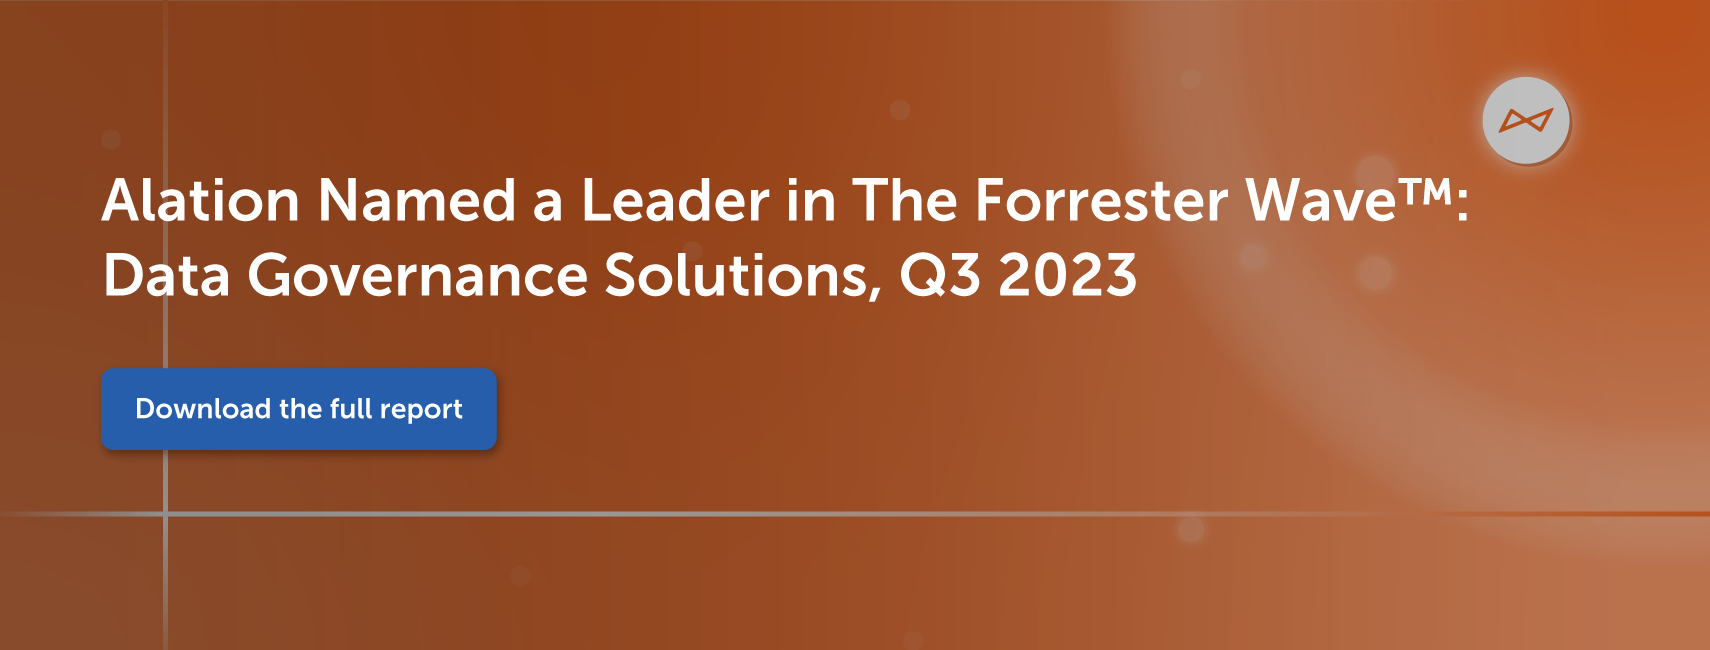 CTA of The Forrester Wave™: Data Governance Solutions, Q3 2023 report.